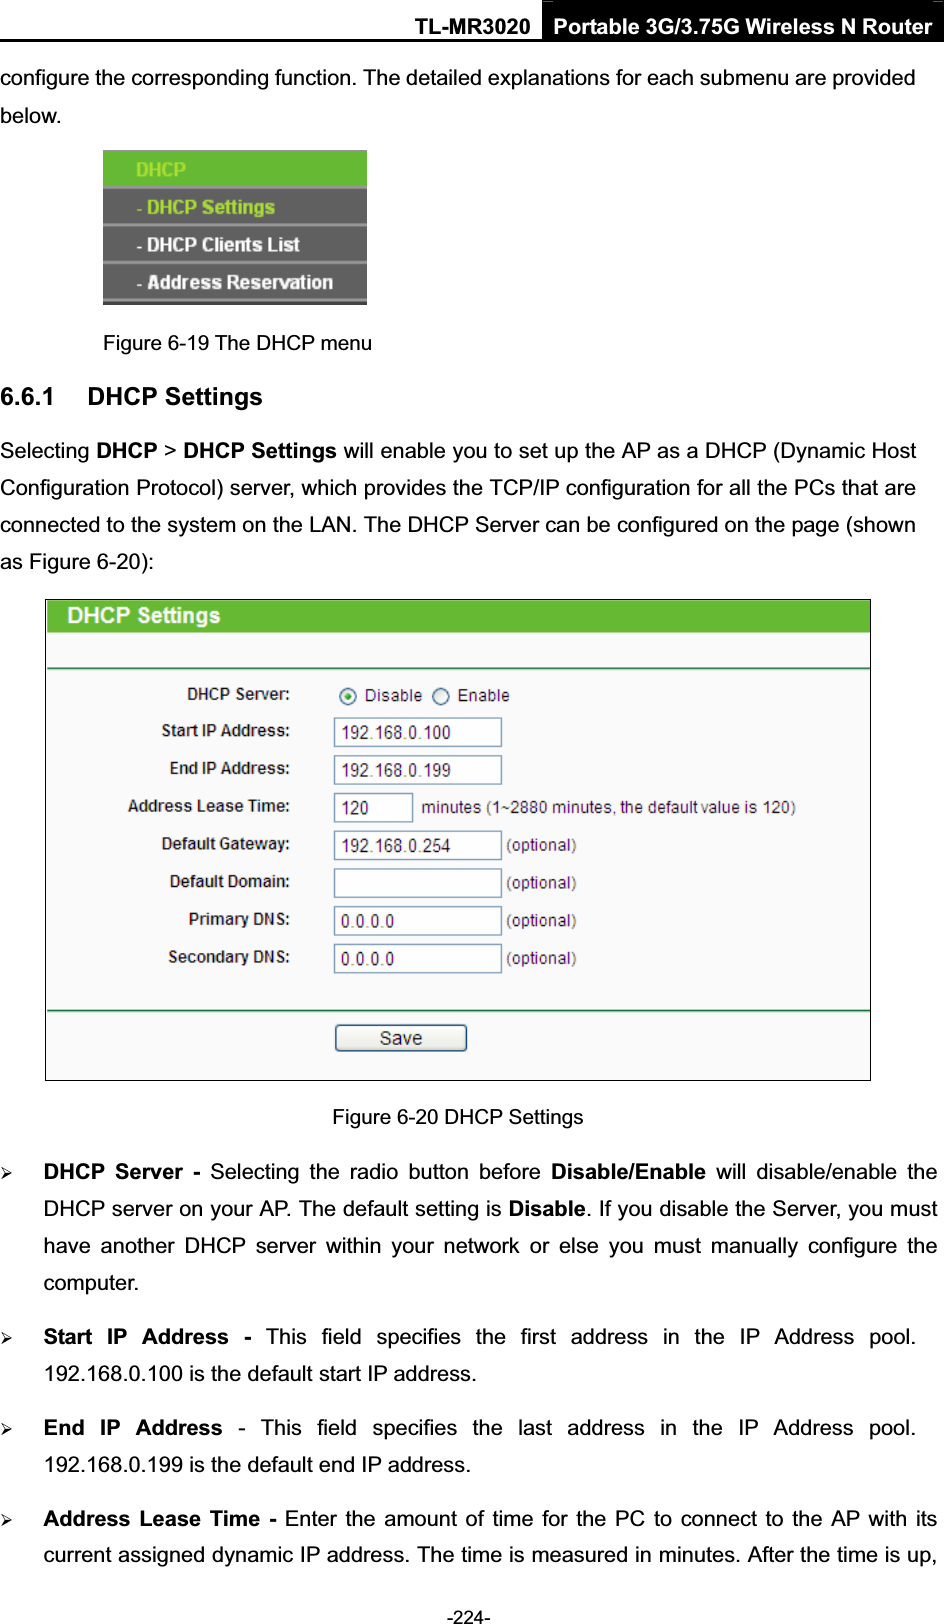 TL-MR3020 Portable 3G/3.75G Wireless N Router-224-configure the corresponding function. The detailed explanations for each submenu are provided below. Figure 6-19 The DHCP menu 6.6.1 DHCP Settings Selecting DHCP &gt;DHCP Settings will enable you to set up the AP as a DHCP (Dynamic Host Configuration Protocol) server, which provides the TCP/IP configuration for all the PCs that are connected to the system on the LAN. The DHCP Server can be configured on the page (shown as Figure 6-20): Figure 6-20 DHCP Settings ¾DHCP  Server  -  Selecting  the  radio  button  before  Disable/Enable  will  disable/enable  the DHCP server on your AP. The default setting is Disable. If you disable the Server, you must have  another  DHCP  server  within  your  network  or  else  you  must  manually  configure  the computer. ¾Start  IP  Address  -  This  field  specifies  the  first  address  in  the  IP  Address  pool. 192.168.0.100 is the default start IP address.   ¾End  IP  Address  -  This  field  specifies  the  last  address  in  the  IP  Address  pool. 192.168.0.199 is the default end IP address.   ¾Address Lease Time - Enter the amount of  time for the PC to connect to the AP with its current assigned dynamic IP address. The time is measured in minutes. After the time is up, 